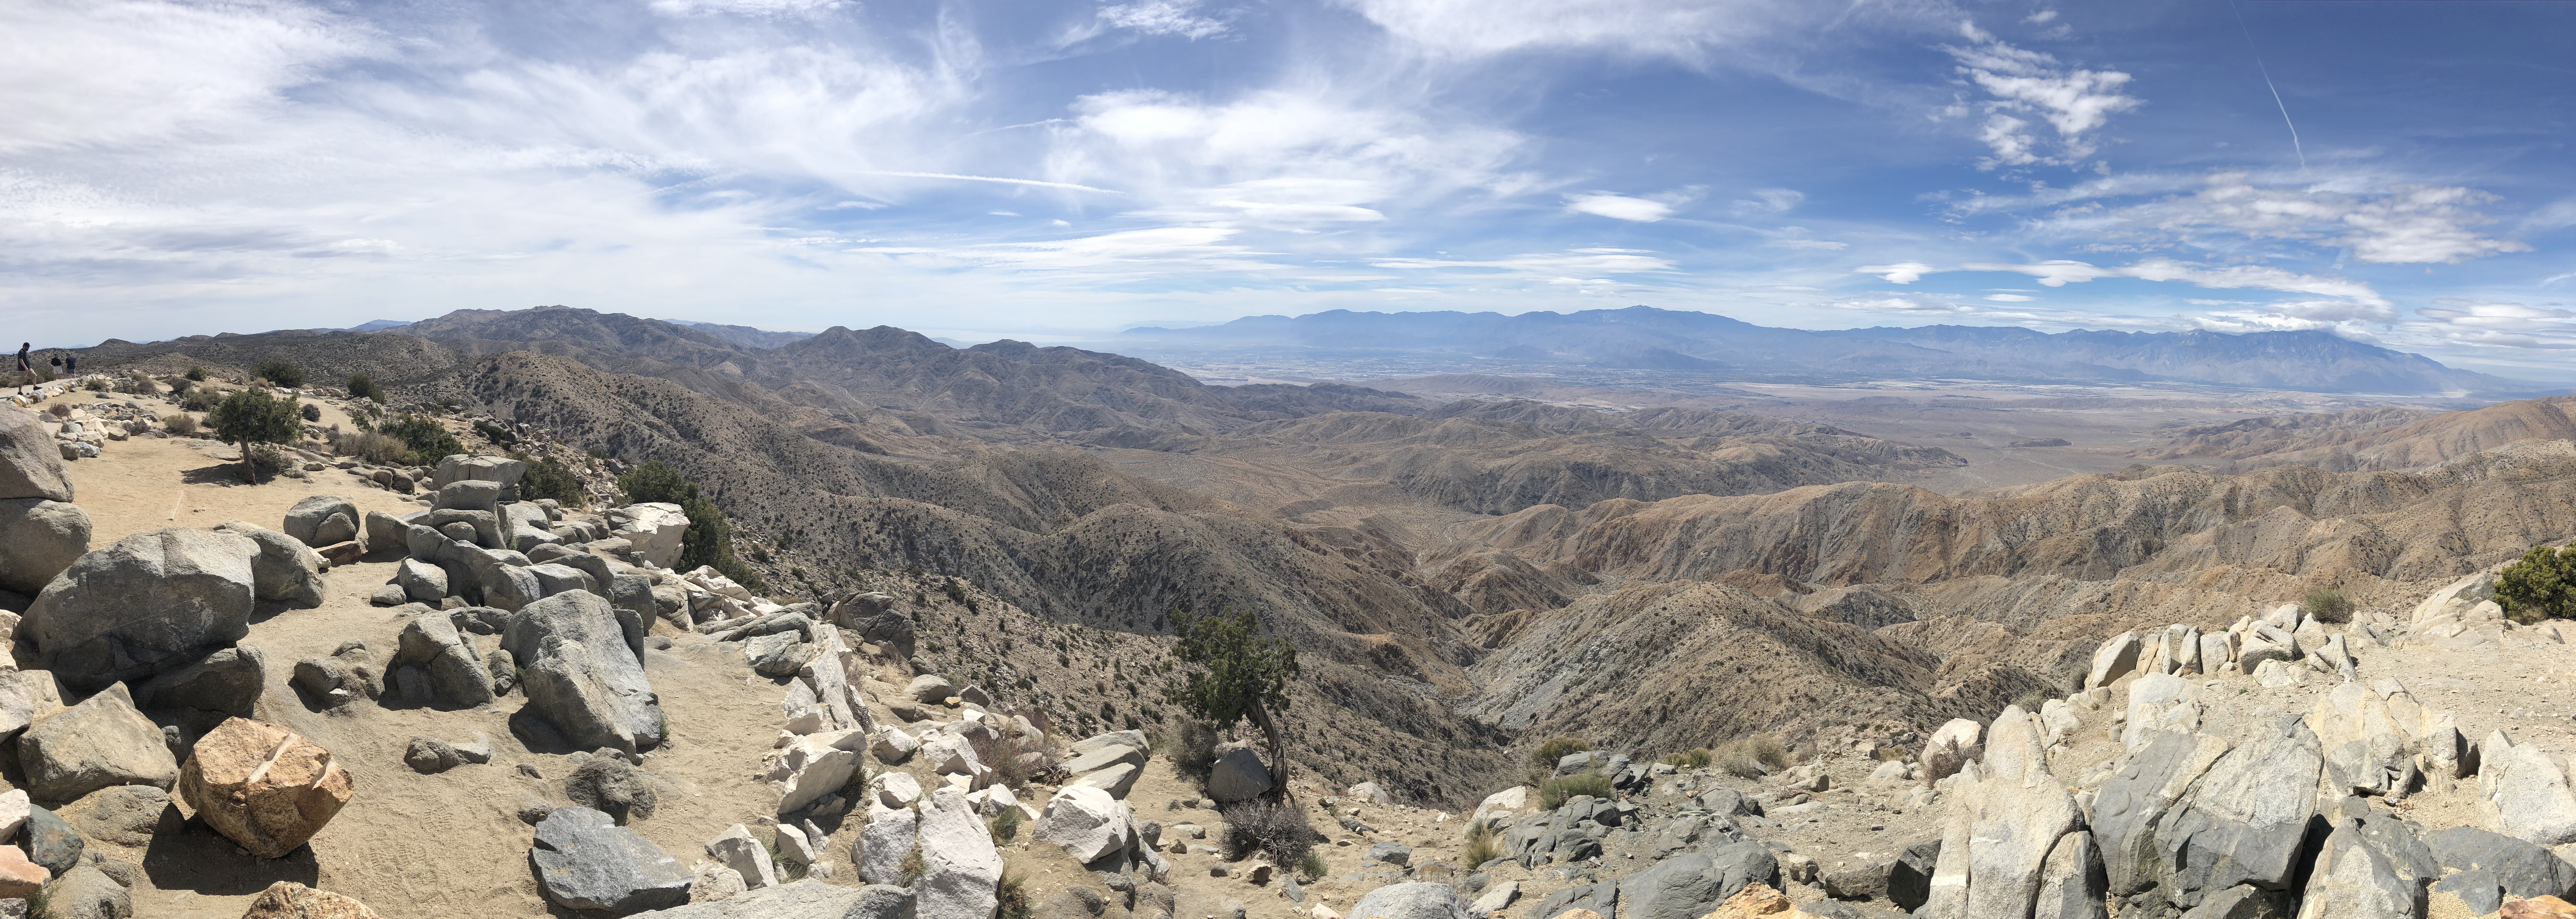 a view of the Salton Sea from Joshua Tree National Park